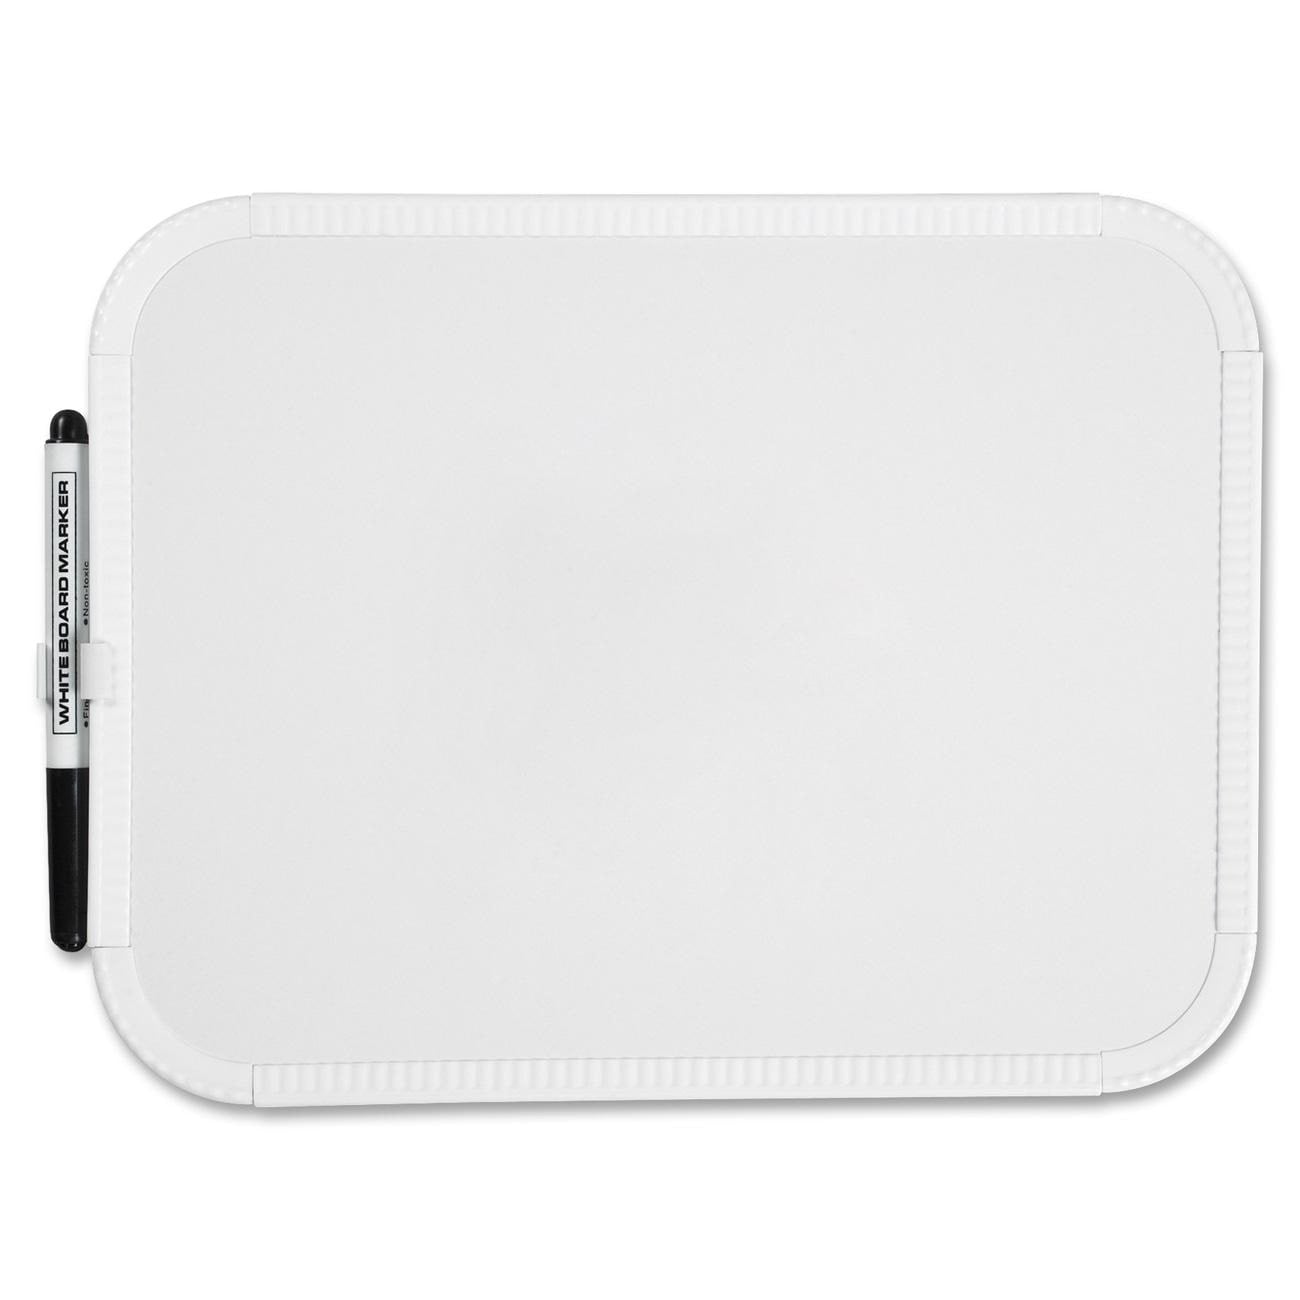 Magnetic DRY ERASE WHITE BOARD 8.5 x 8.5 in TO DO LIST Free shipping! 